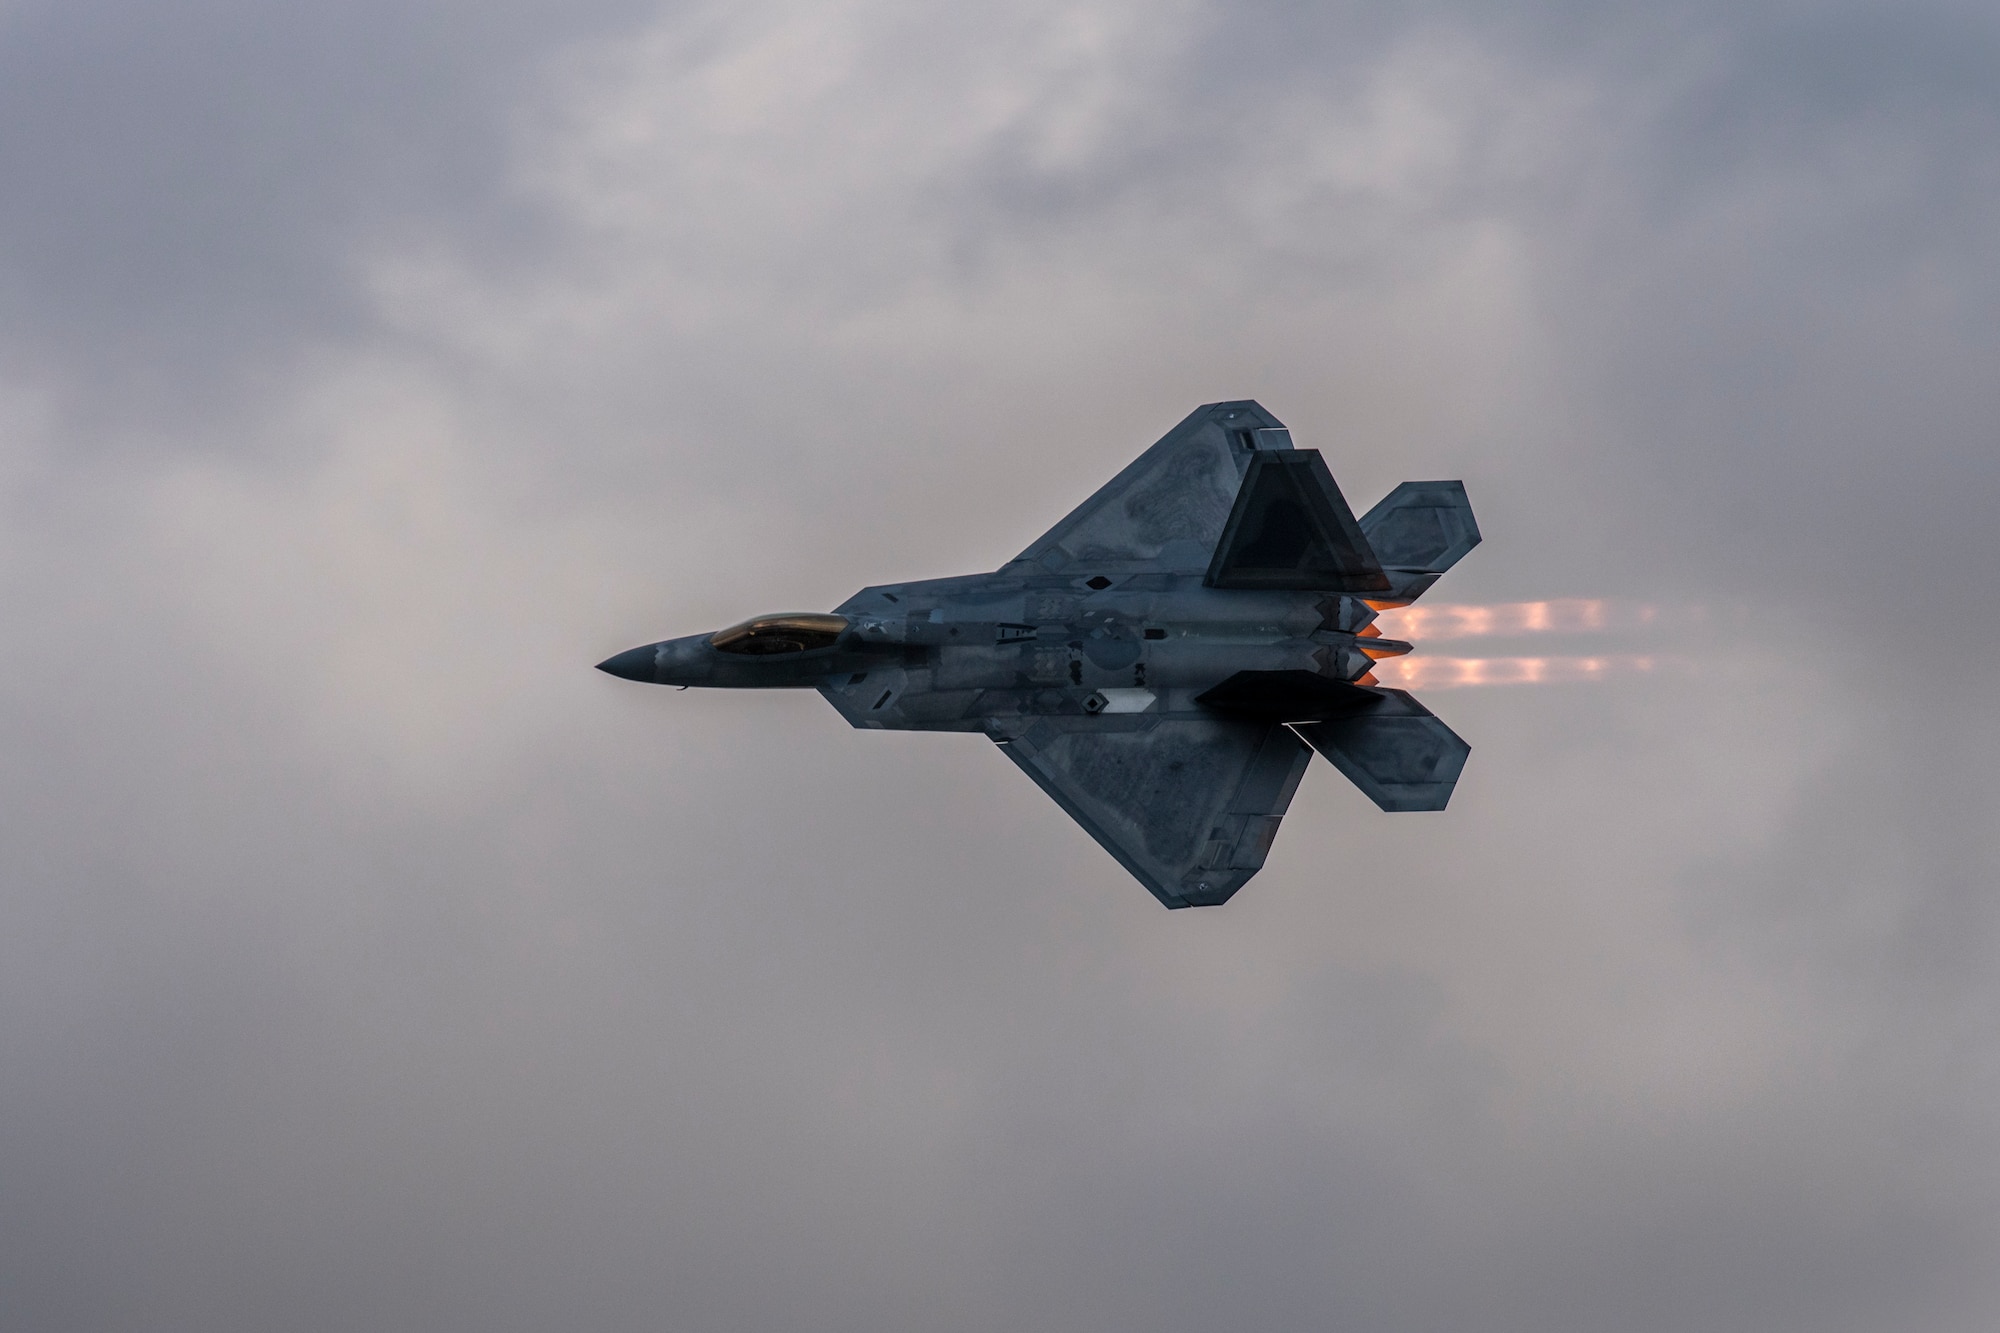 An F-22 Raptor performs an aerial demonstration for the 2019 Thunder Over Dover Air Show, Sept. 13, 2019, at Dover Air Force Base, Del. The F-22 Raptor Demo Team travels to air shows showcasing the capabilities of the world’s premier 5th generation fighter. (U.S. Air Force photo by Senior Airman Christopher Quail)